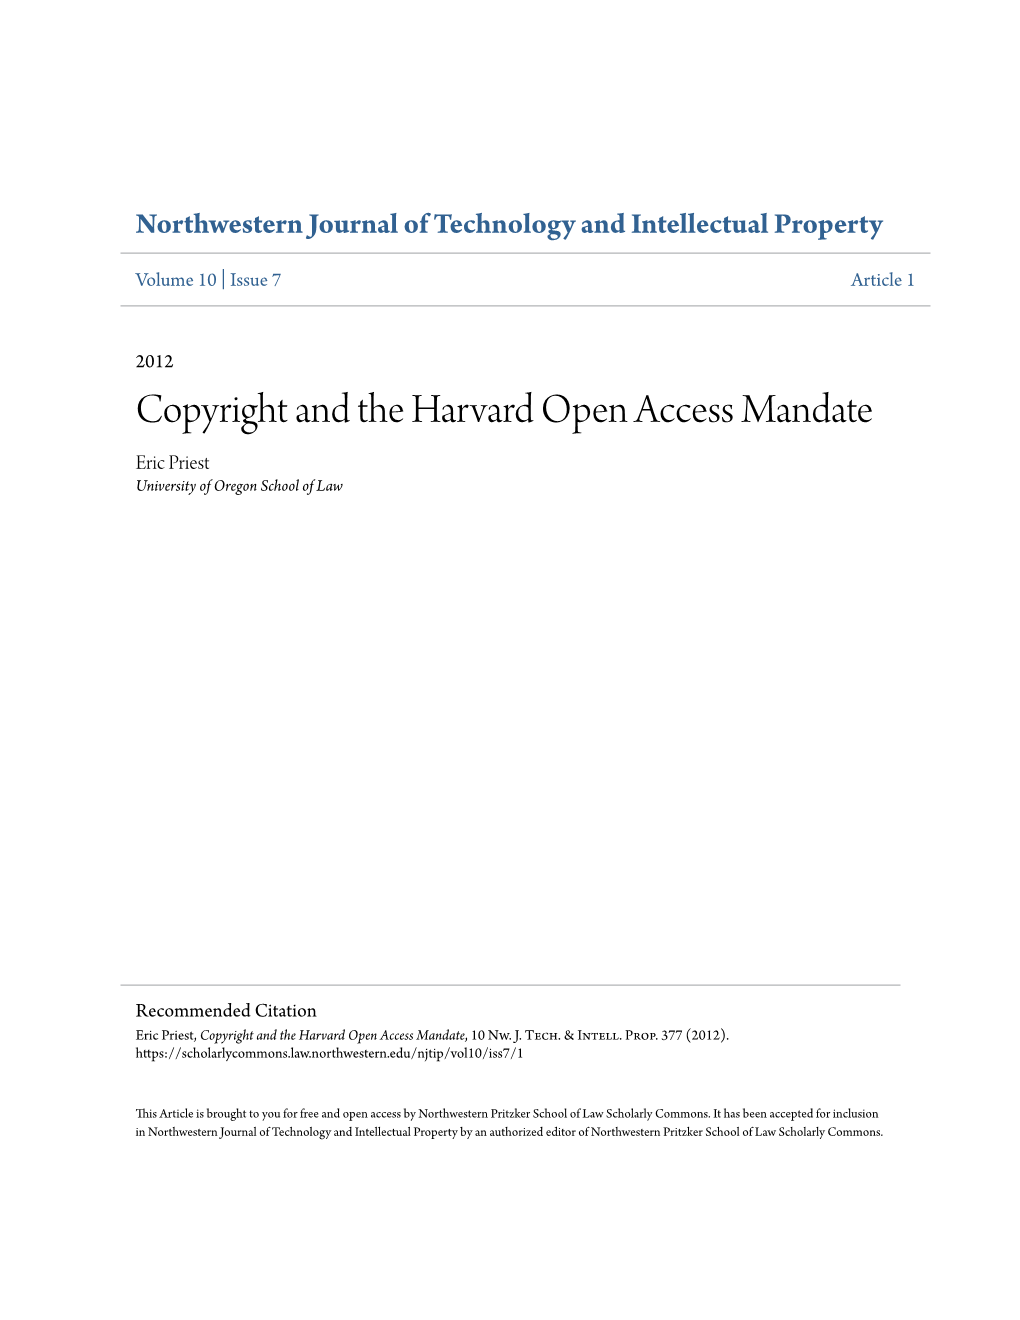 Copyright and the Harvard Open Access Mandate Eric Priest University of Oregon School of Law